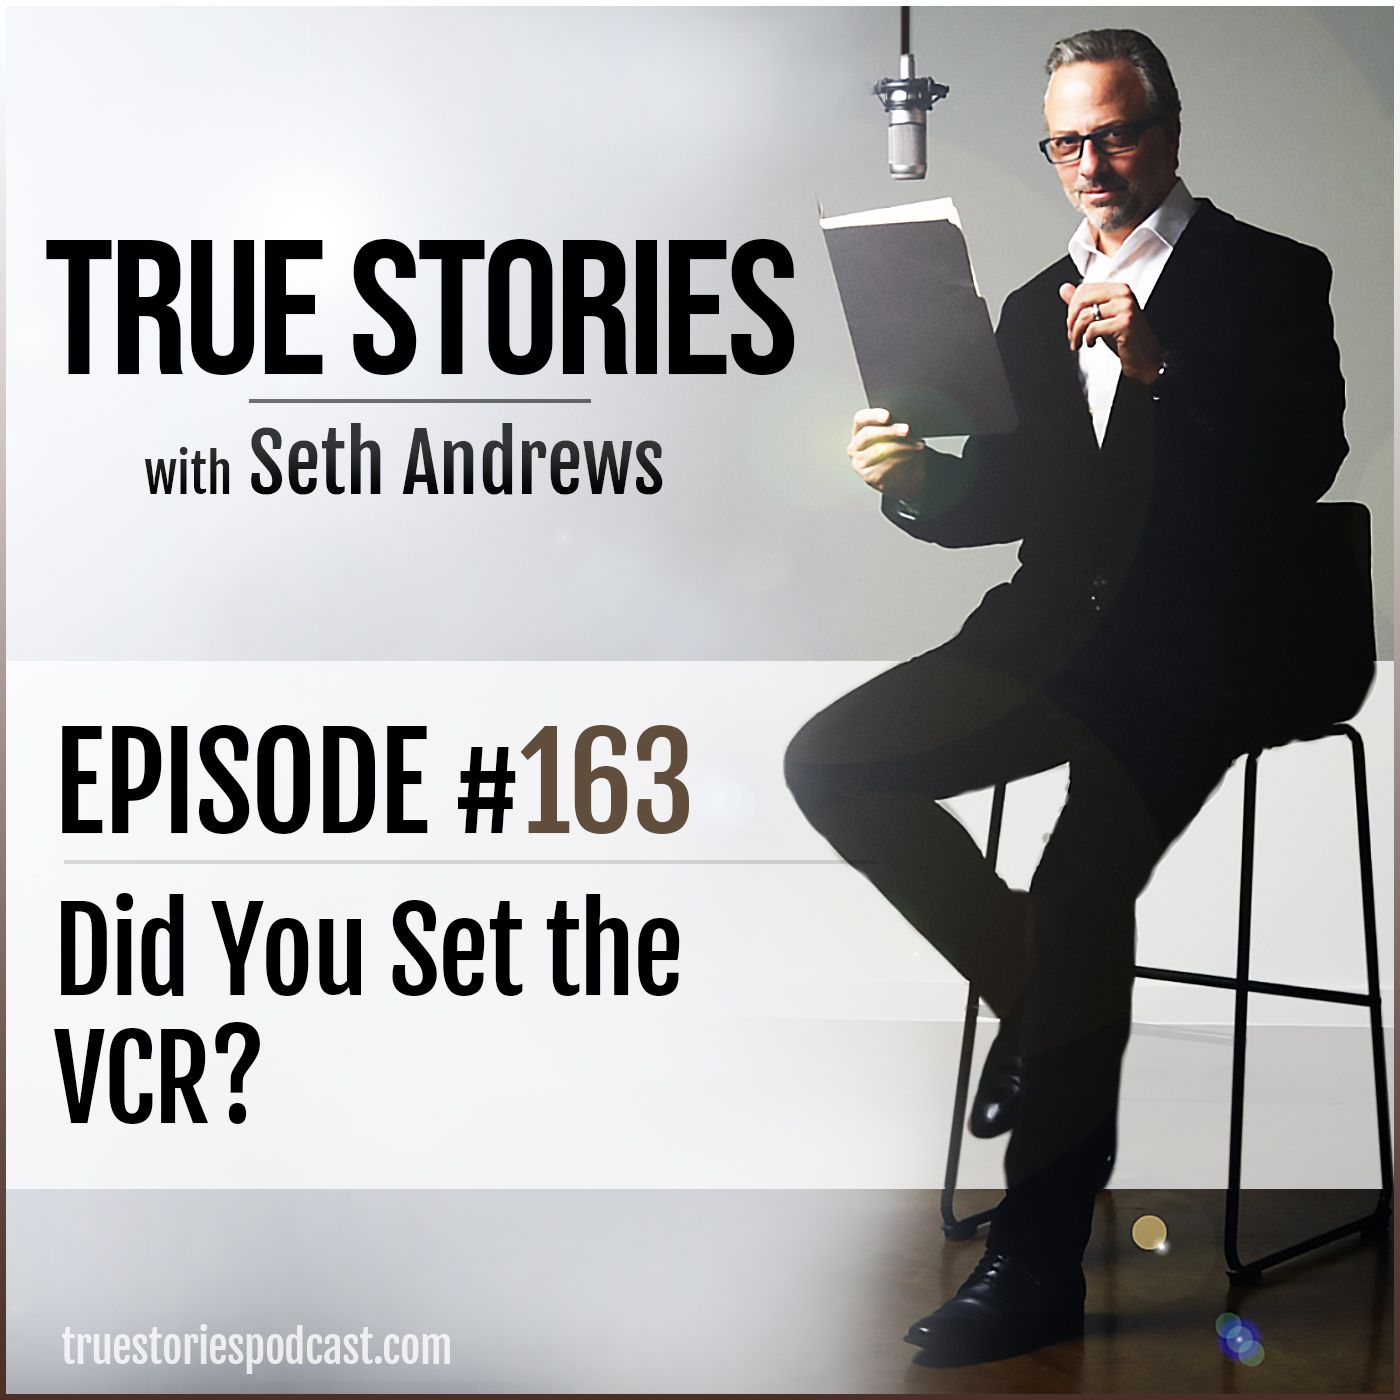 True Stories #163 - Did You Set the VCR?